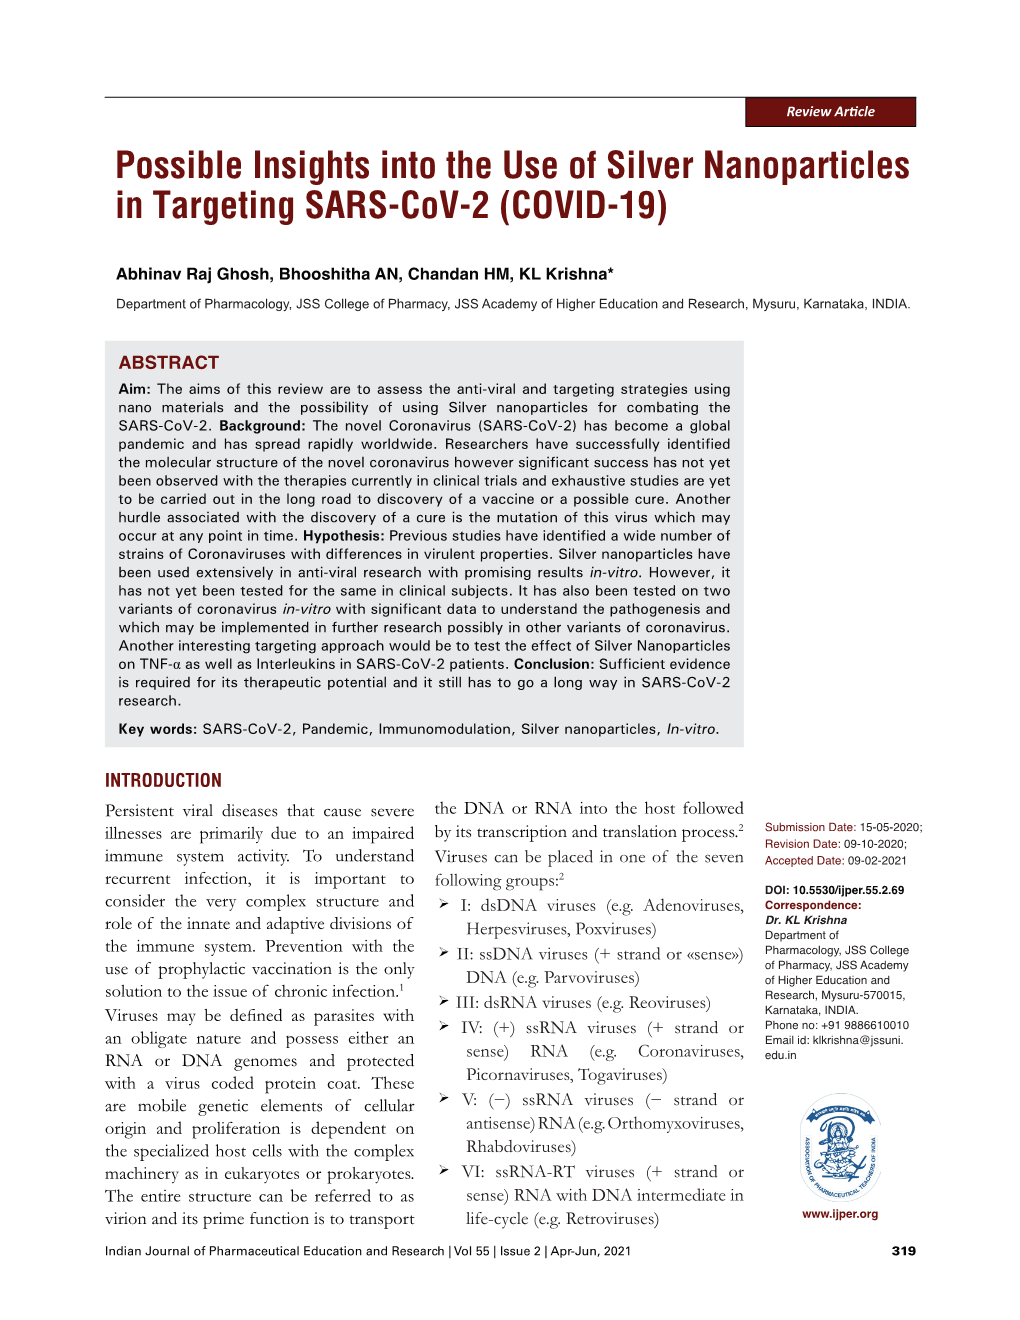 Possible Insights Into the Use of Silver Nanoparticles in Targeting SARS-Cov-2 (COVID-19)